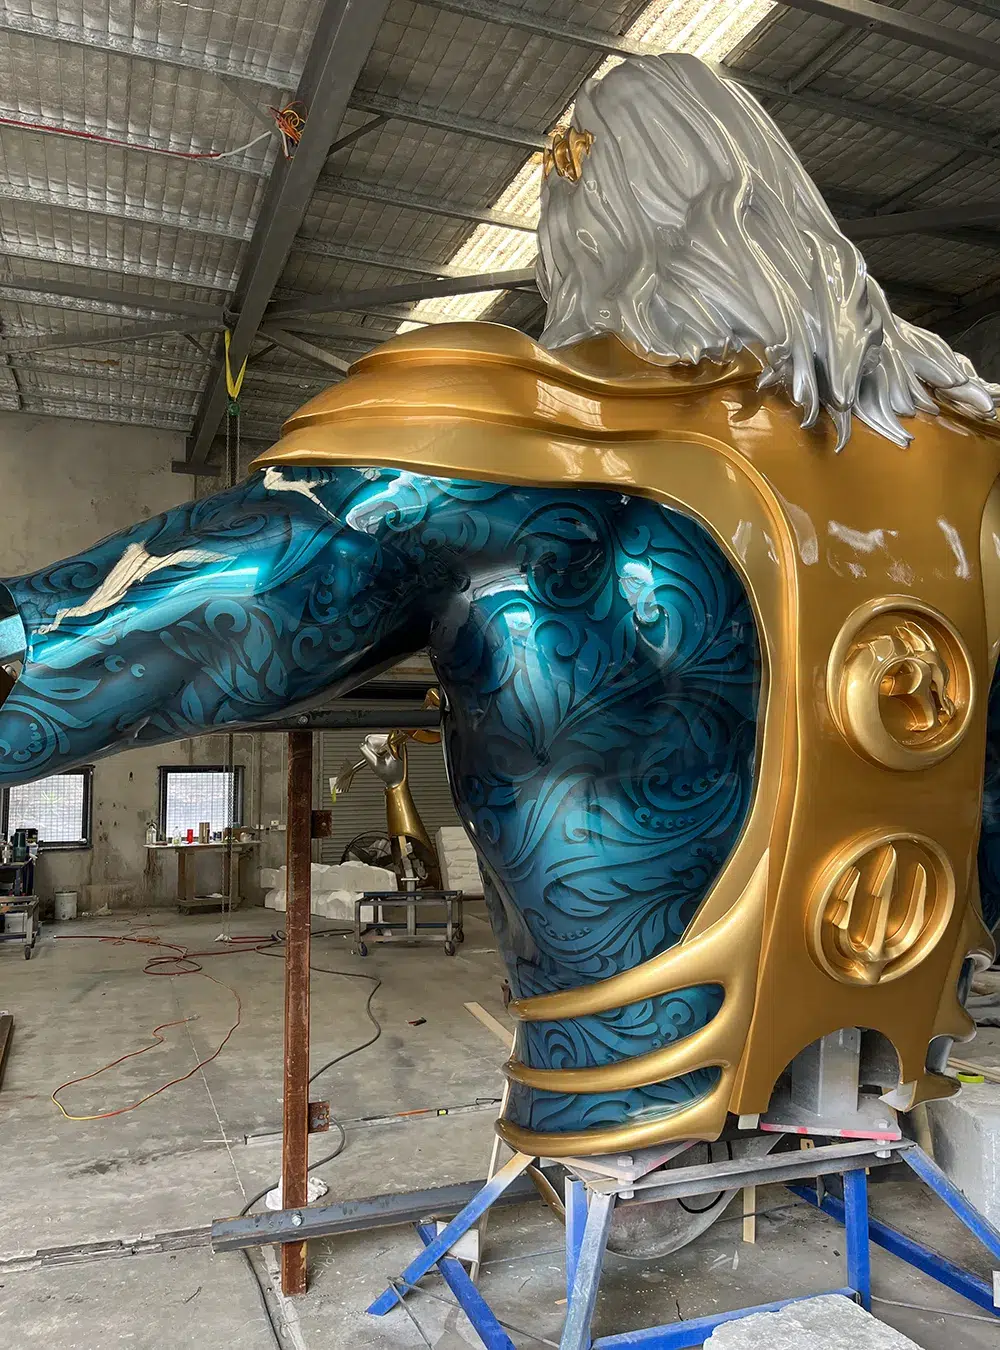 Artists working on the finishing touches of the Atlantean figure.